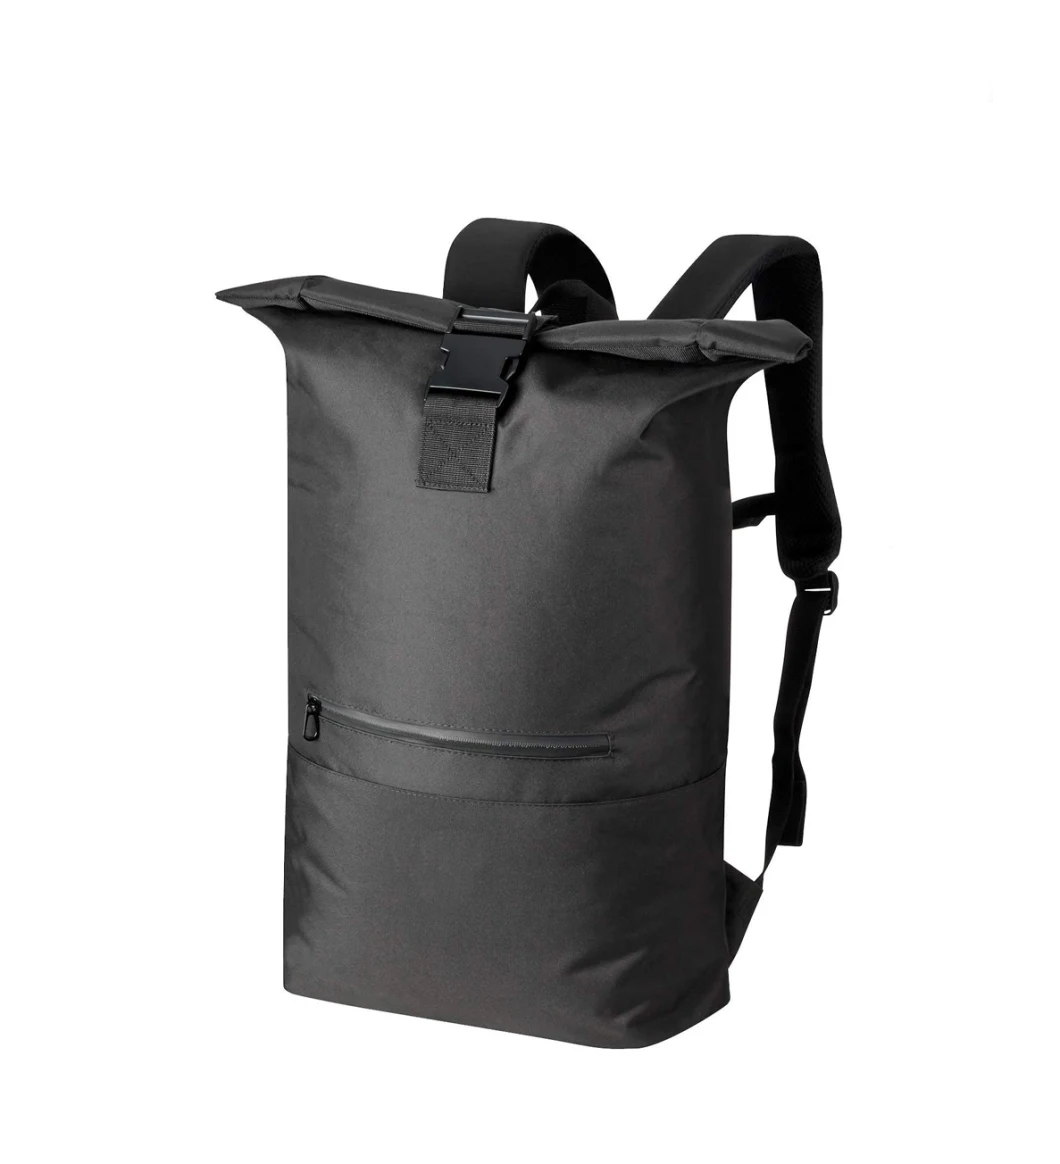 New Fashion Lightweight Roll-Top Backpack 35L Casual Rucksack Lifestyle Rolling Backpack Bag